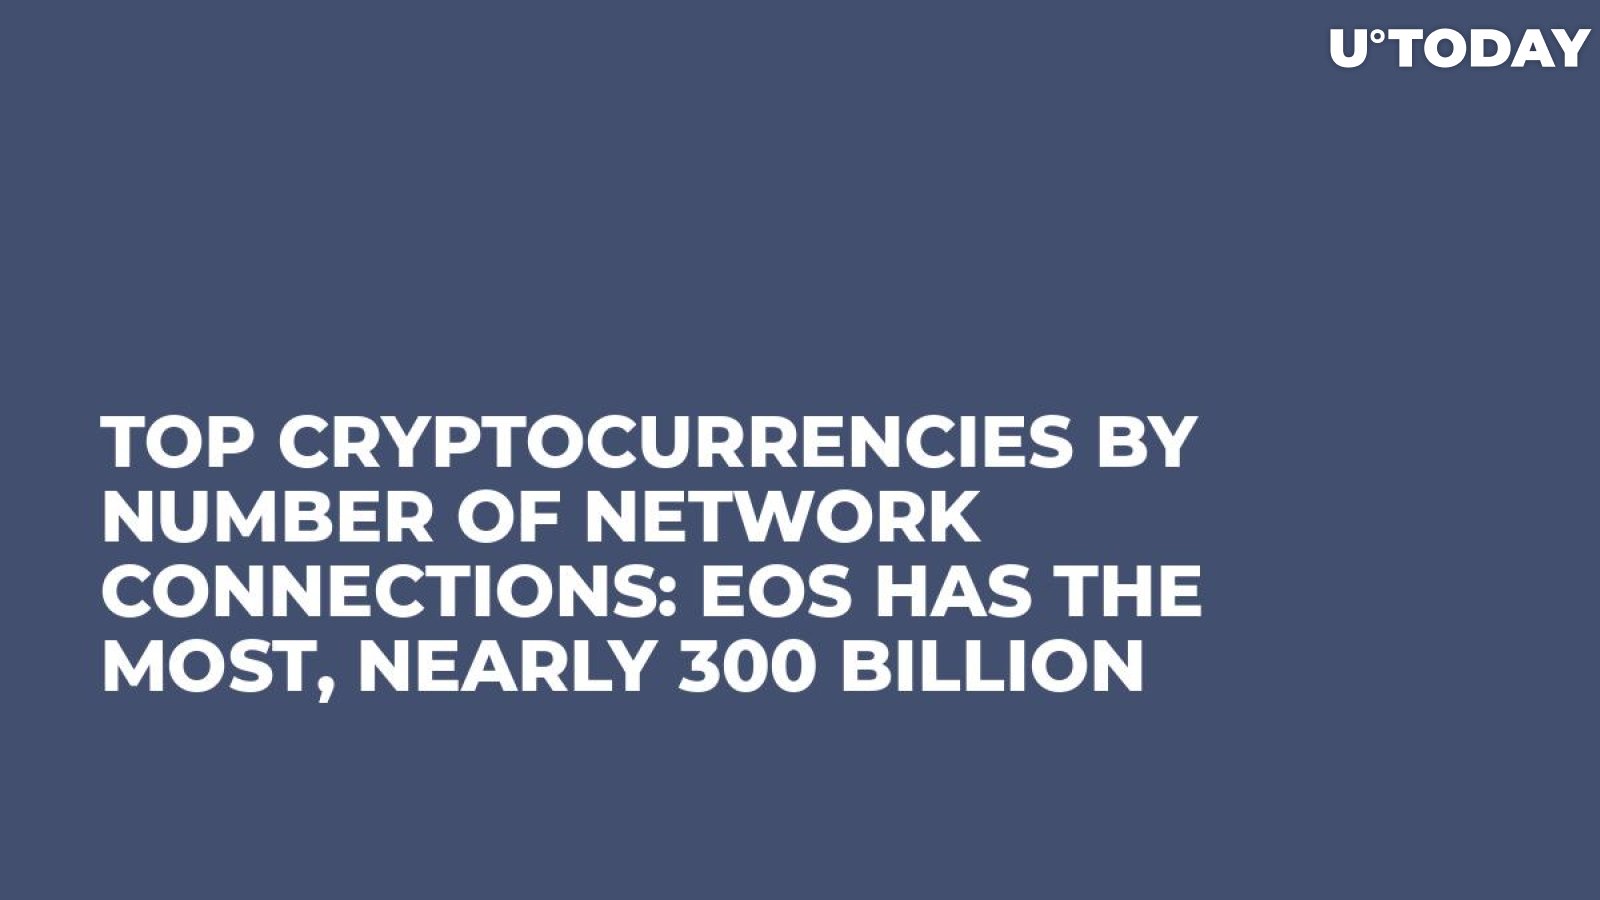 Top Cryptocurrencies by Number of Network Connections: EOS Has the Most, Nearly 300 Billion